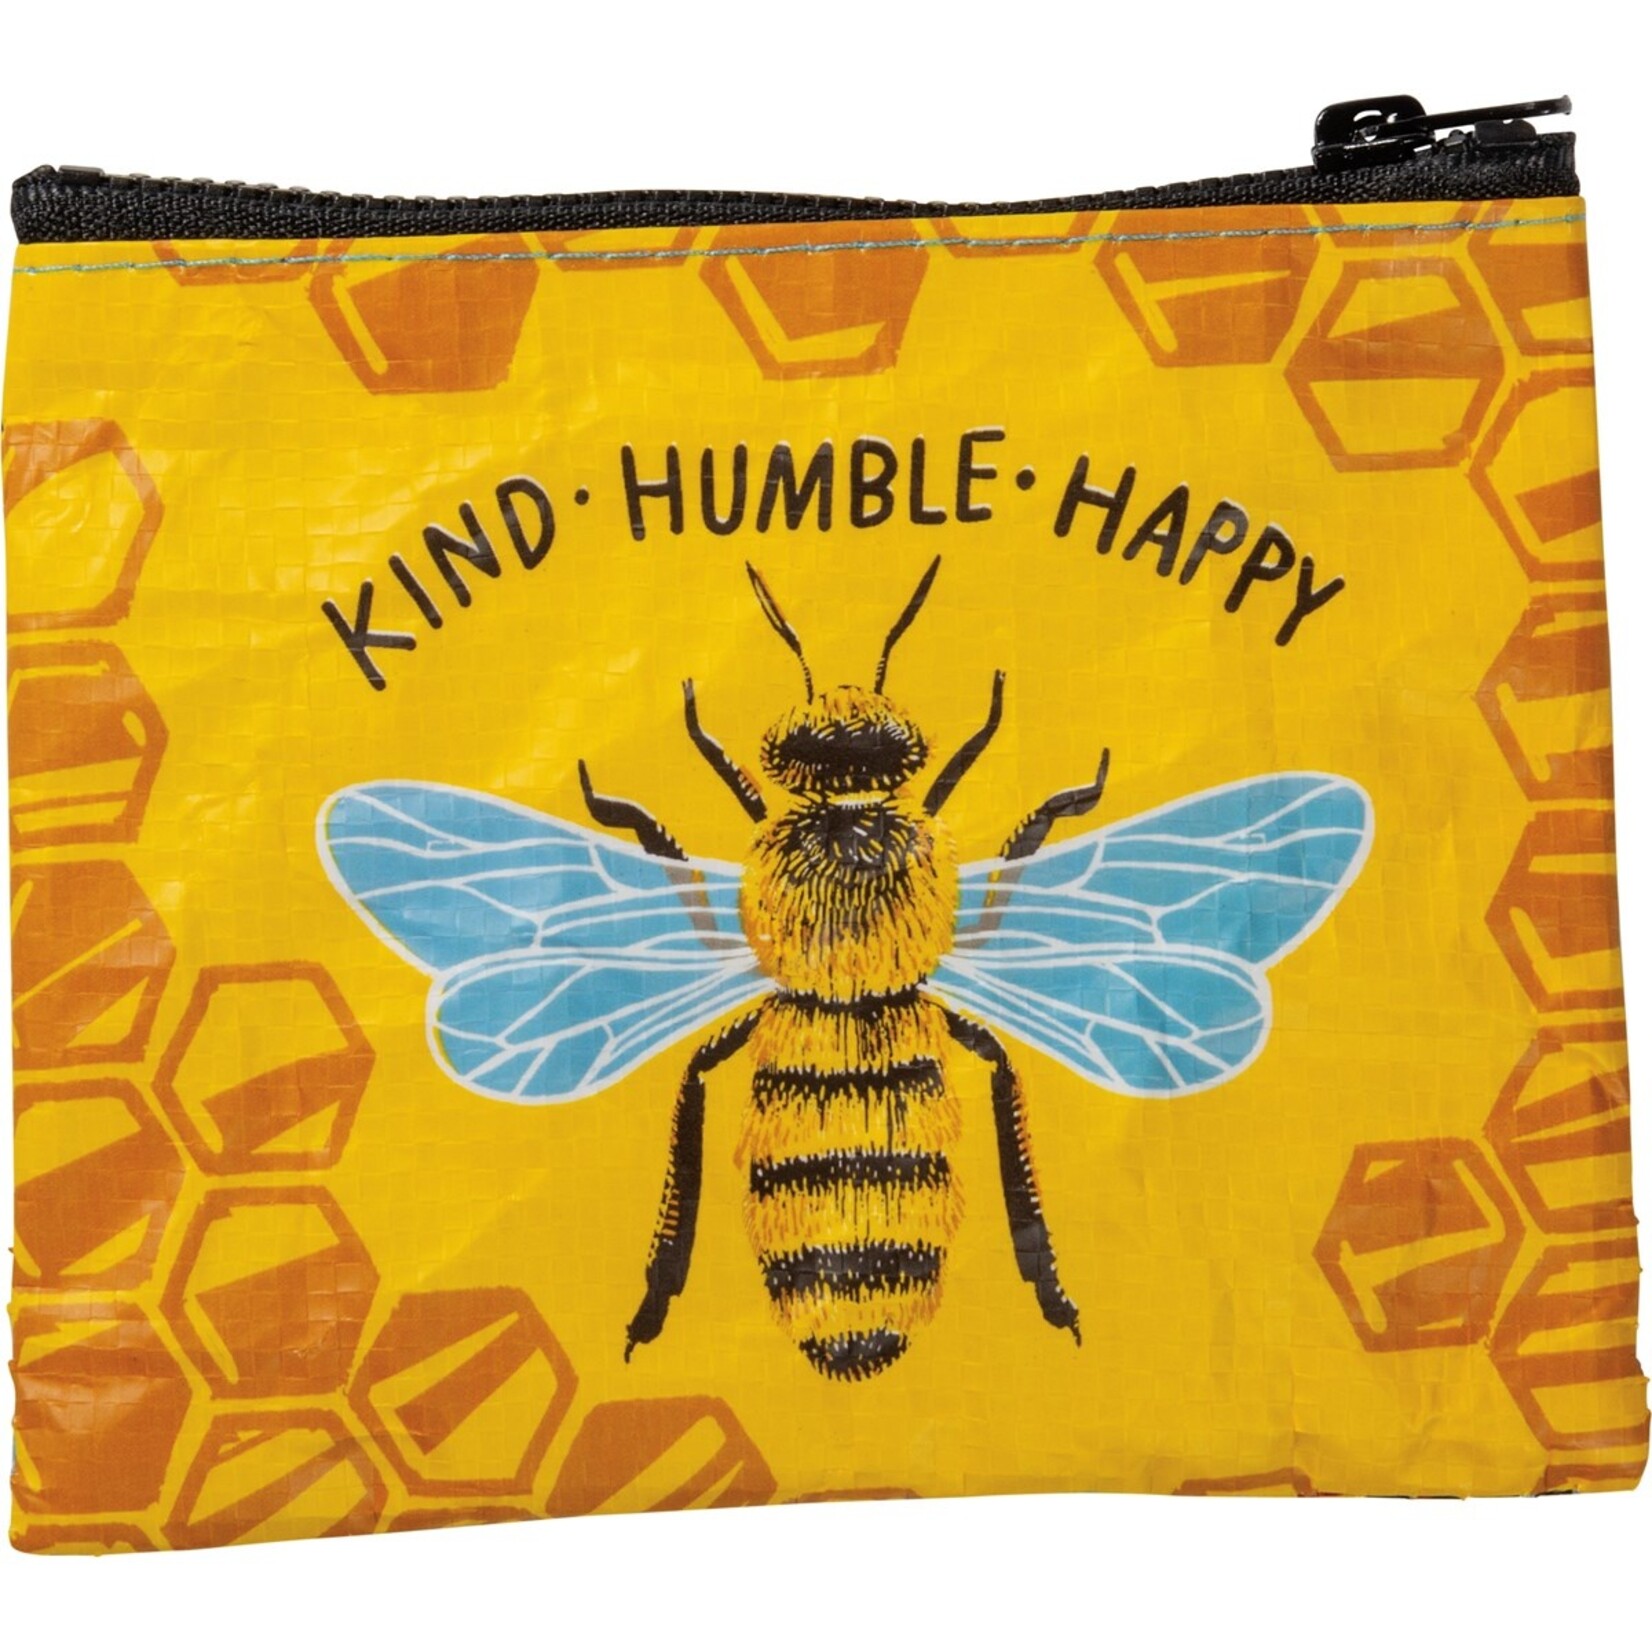 Primitives by Kathy Primitives by Kathy Zipper Wallet Bee Kind, Humble, & Happy